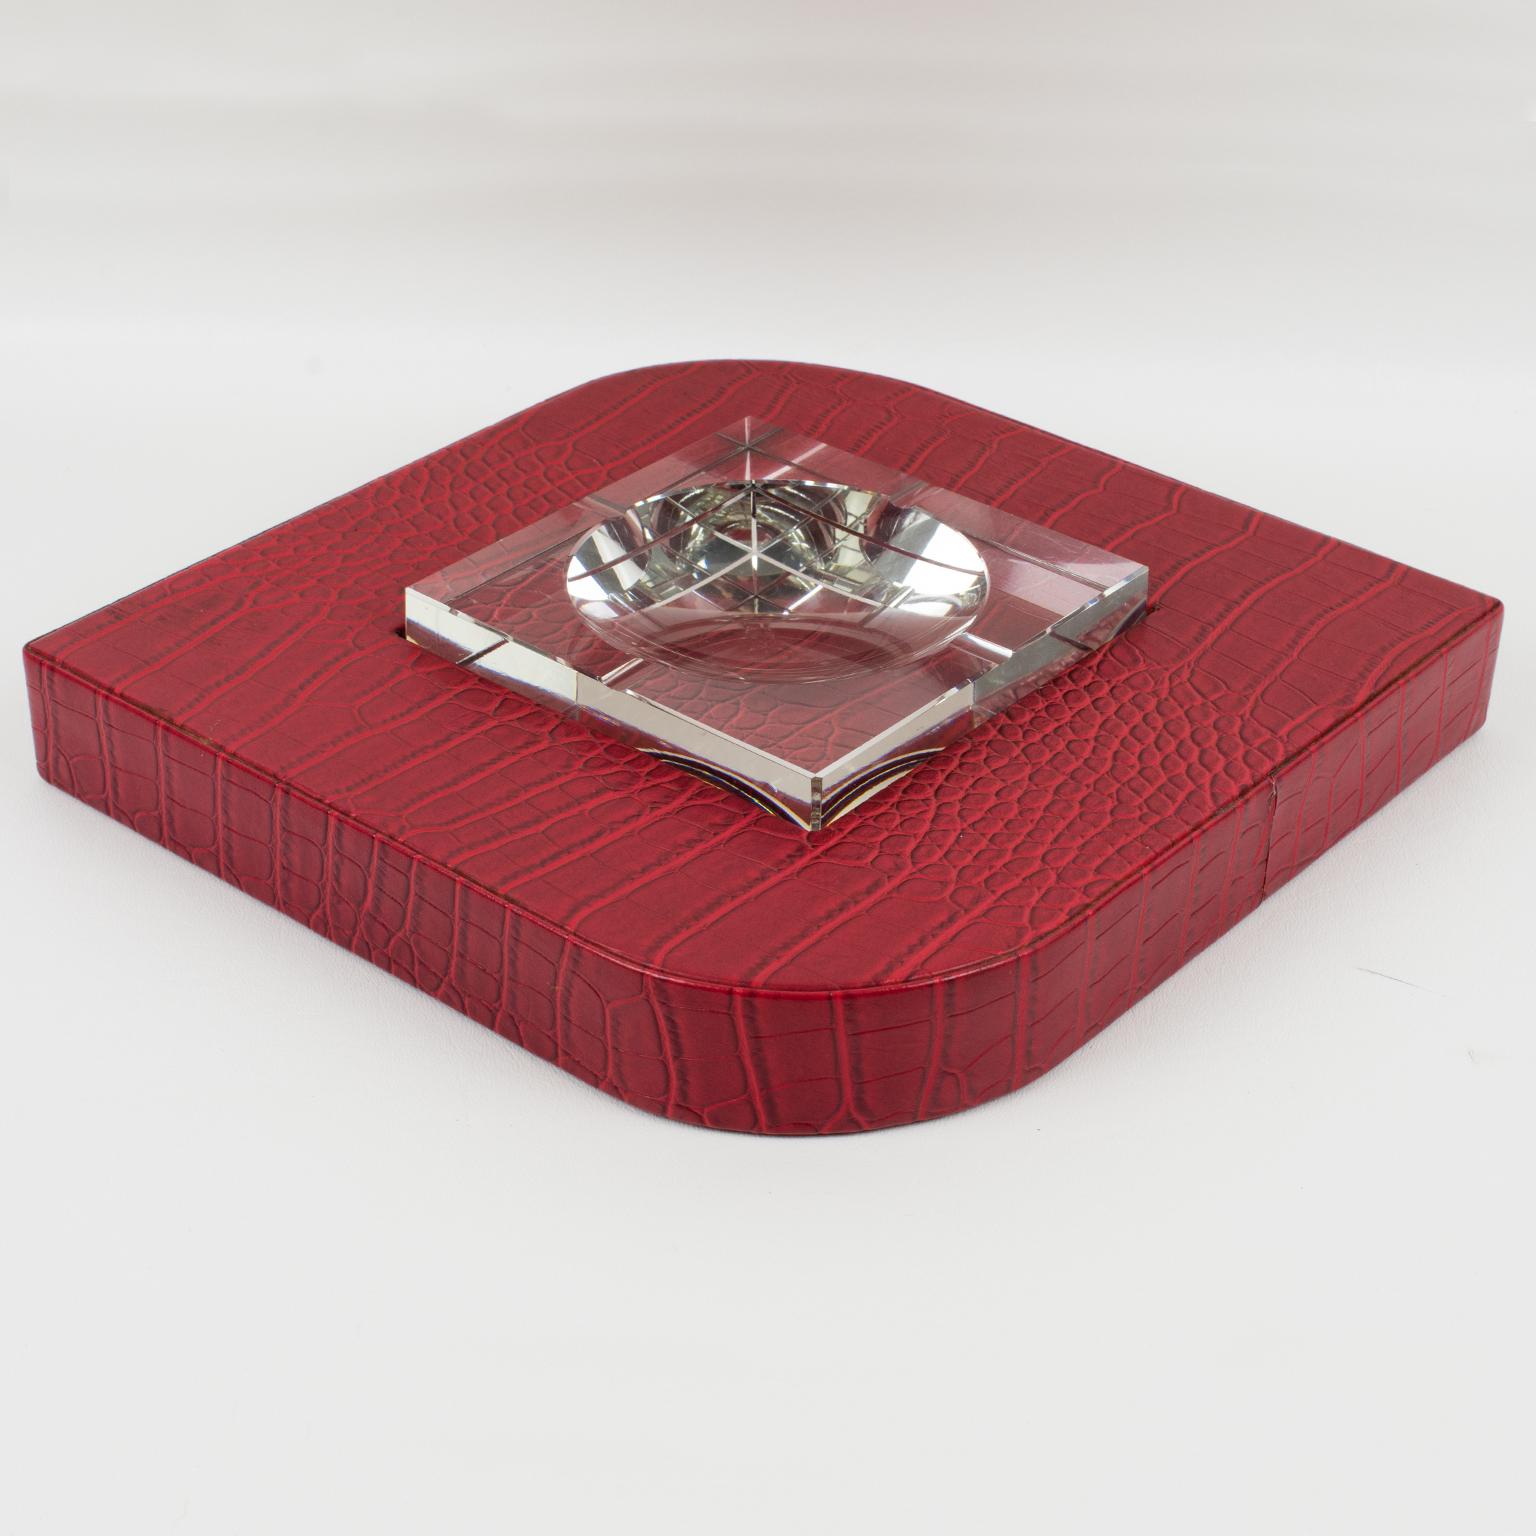 Dupre Lafon Style Red Leather and Crystal Cigar Ashtray Catchall Vide Poche For Sale 6